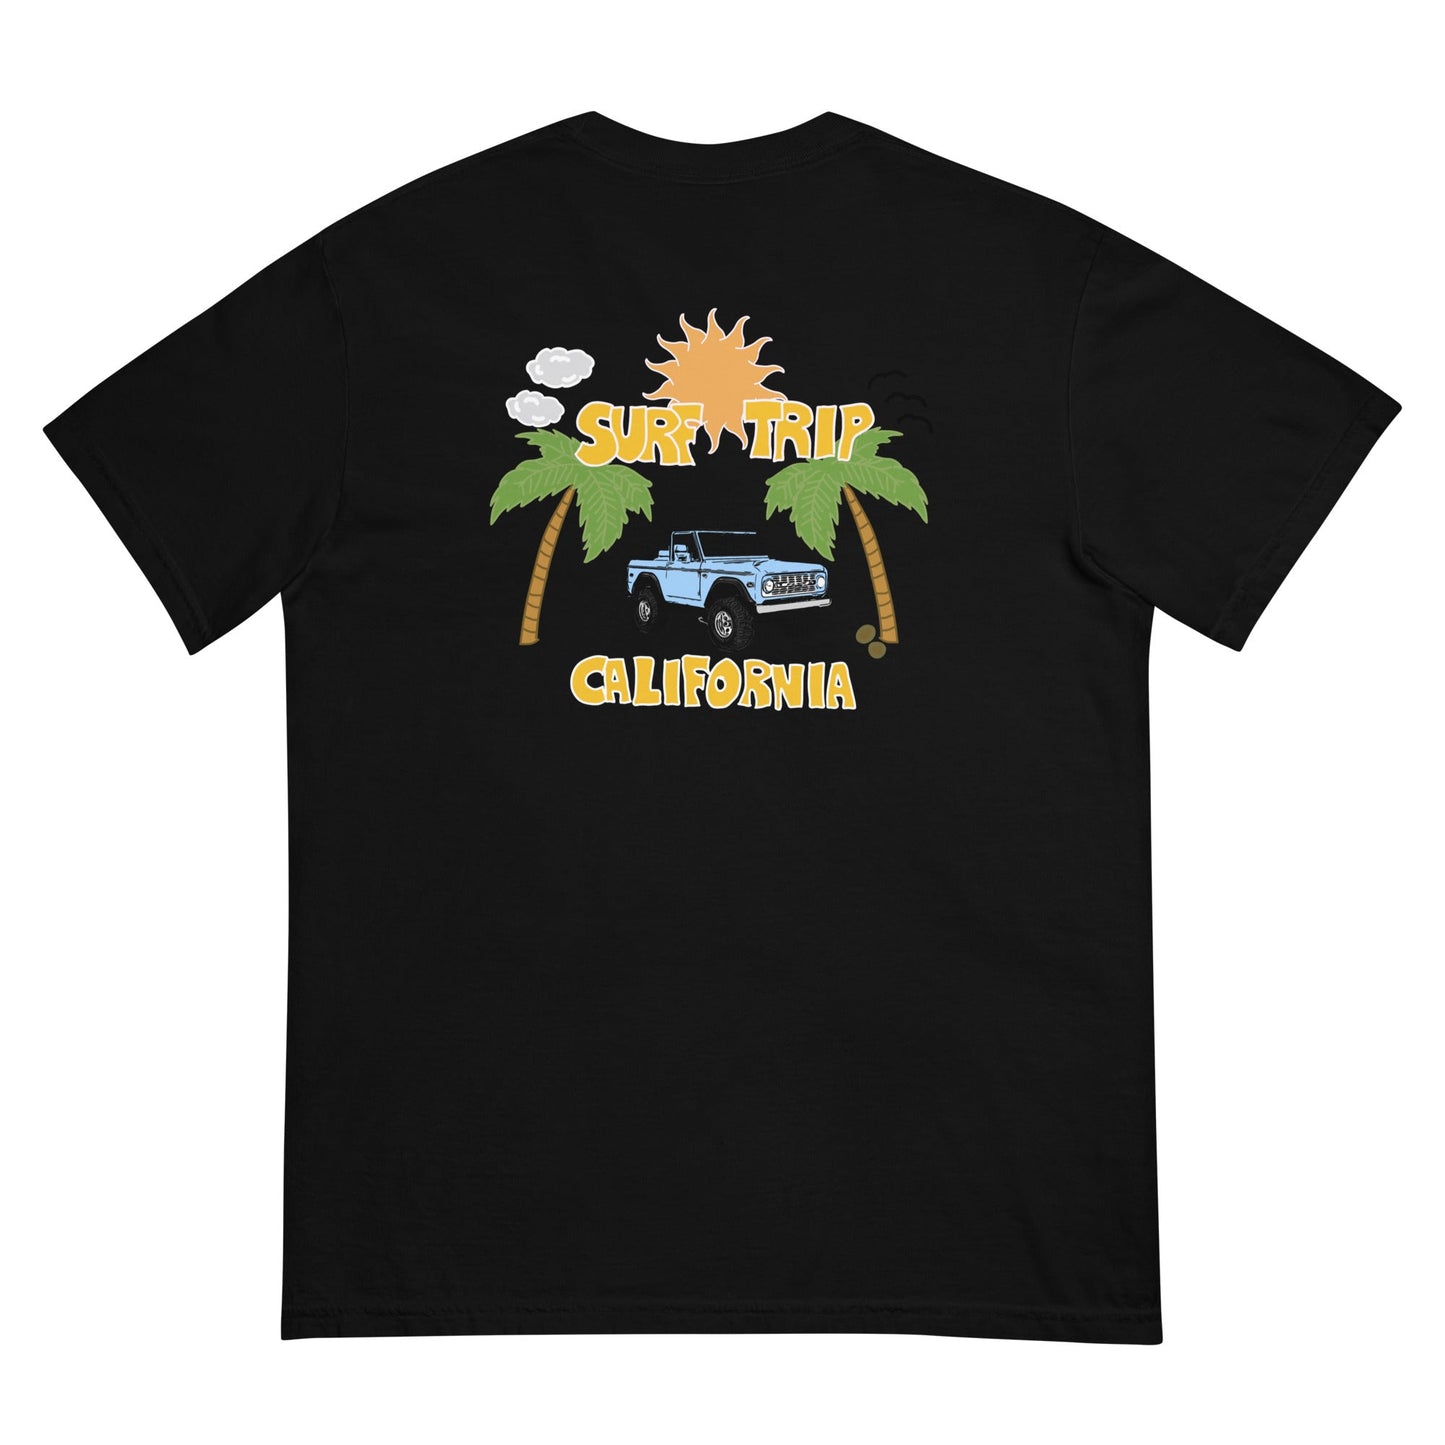 Stoked Tee - Surf Trip Supply